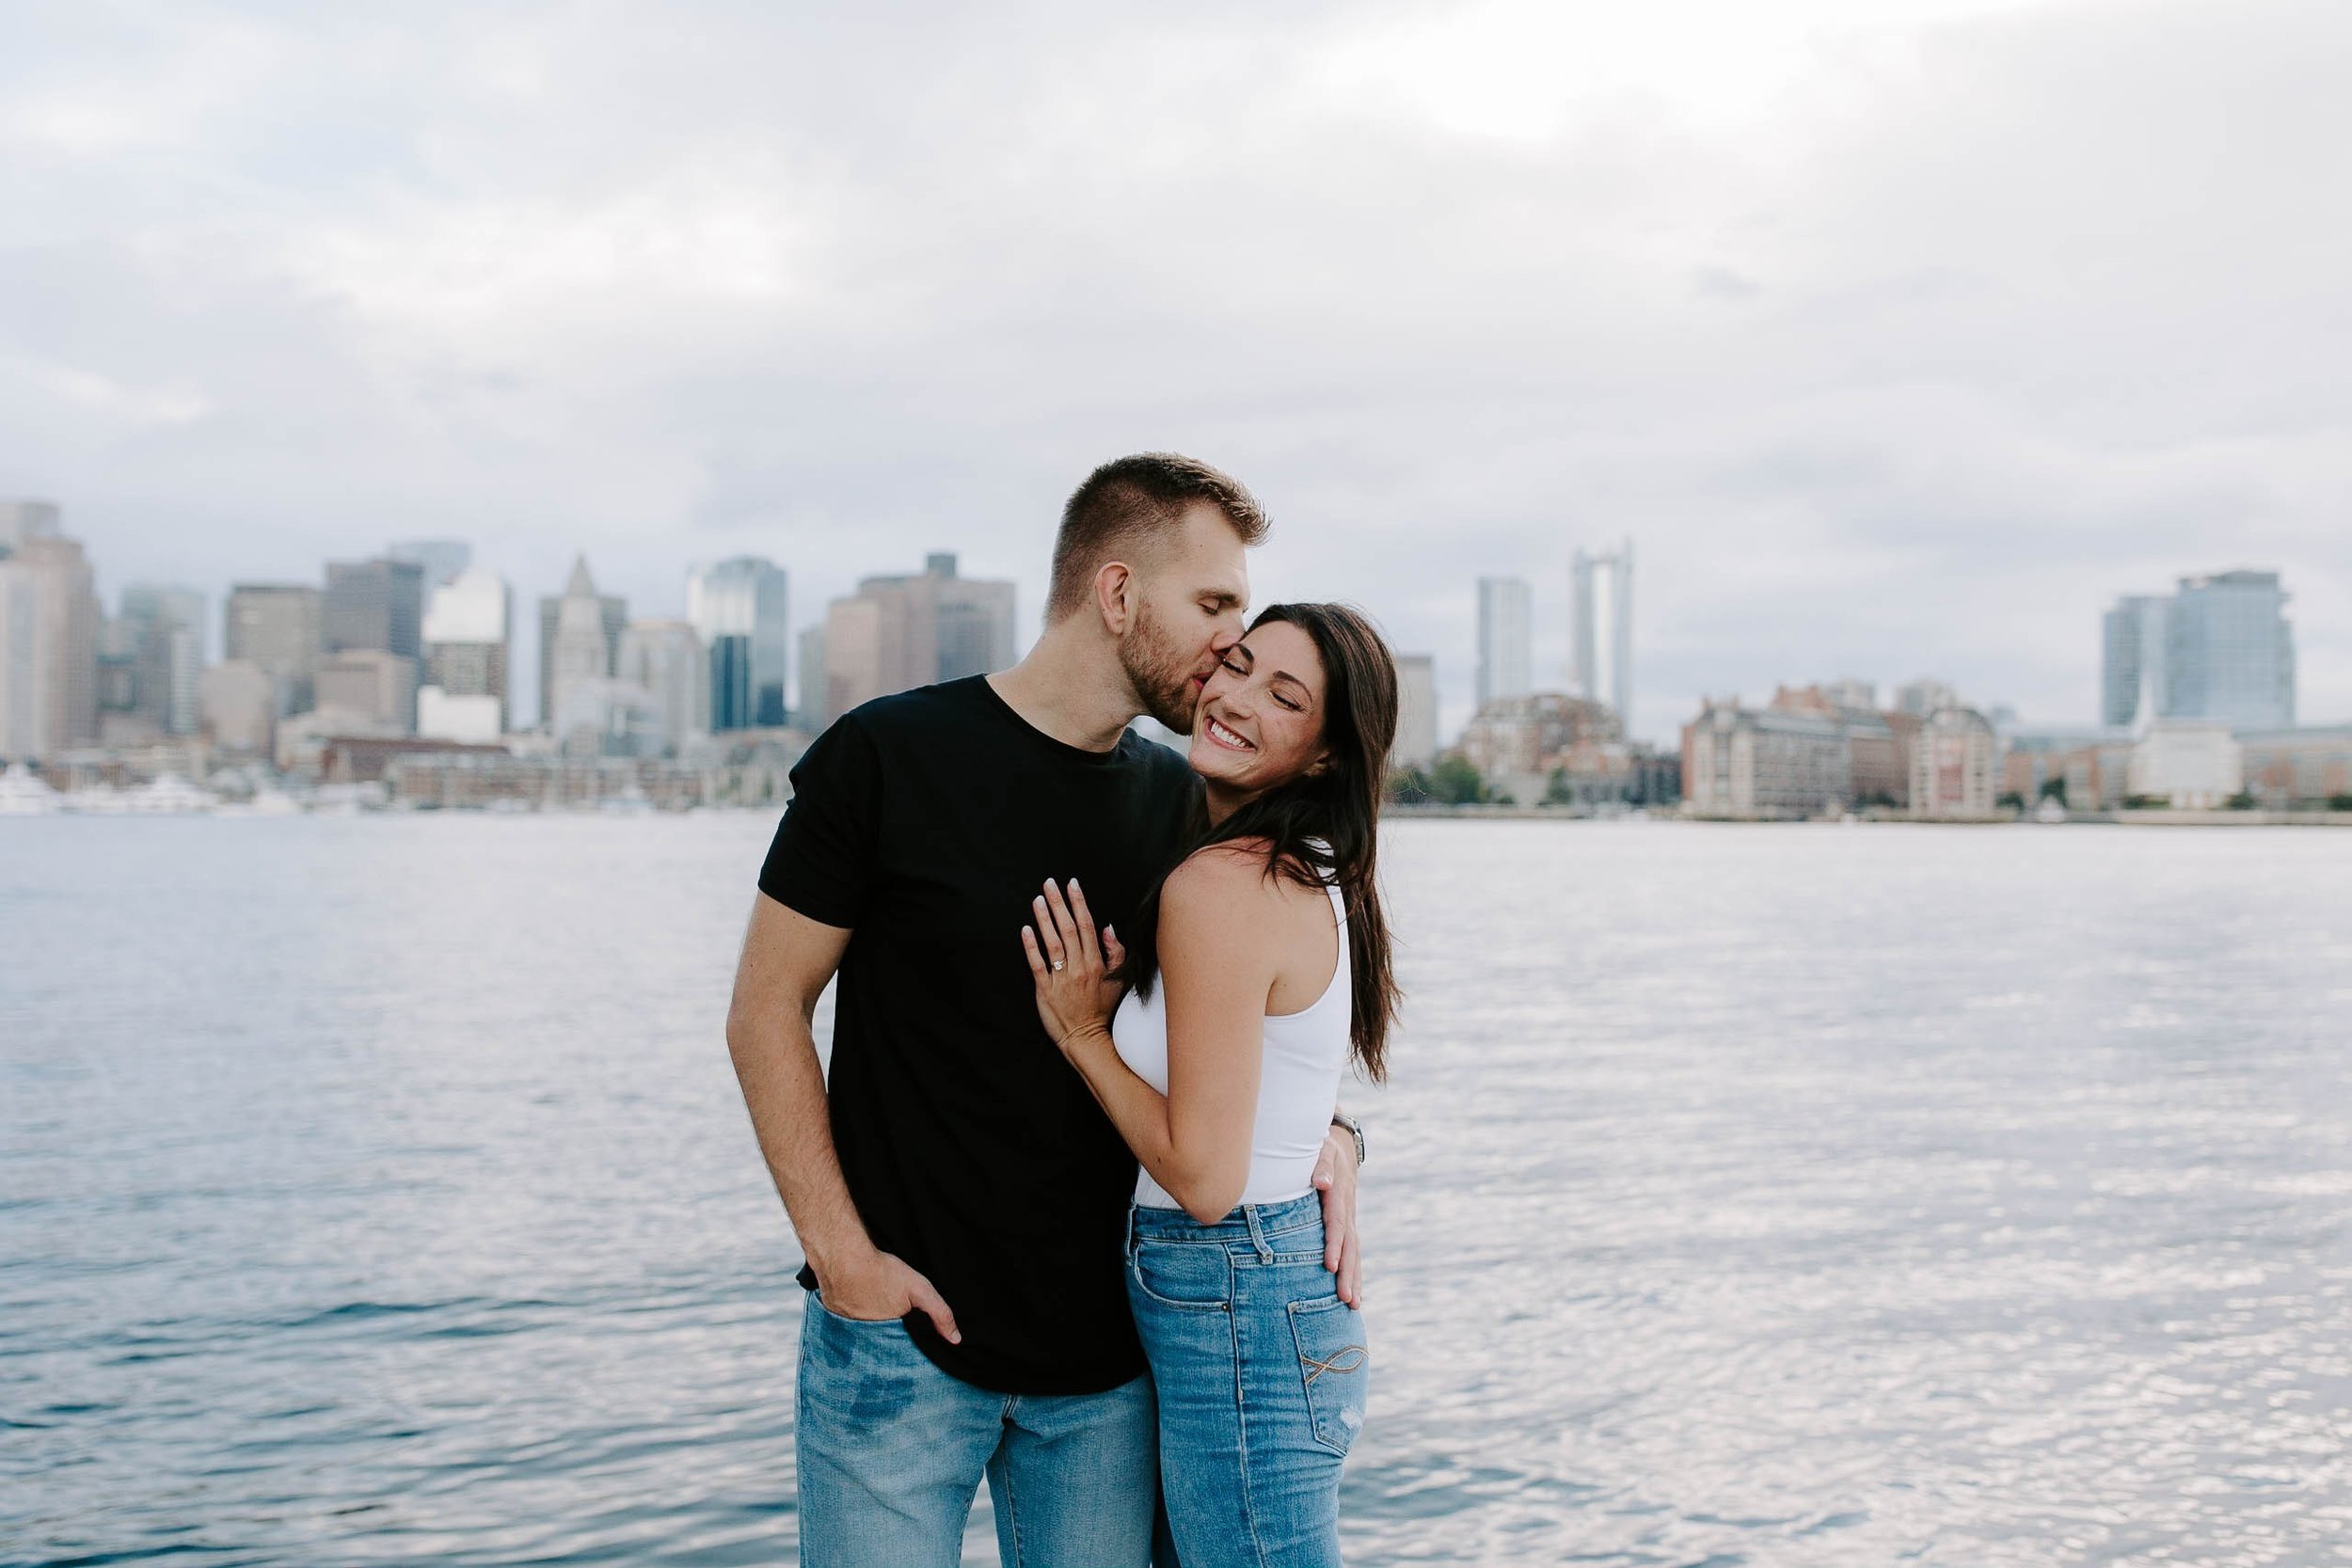 Boyfriend kissing girlfriends forehead while standing on the waterfront with the skyline view in the background